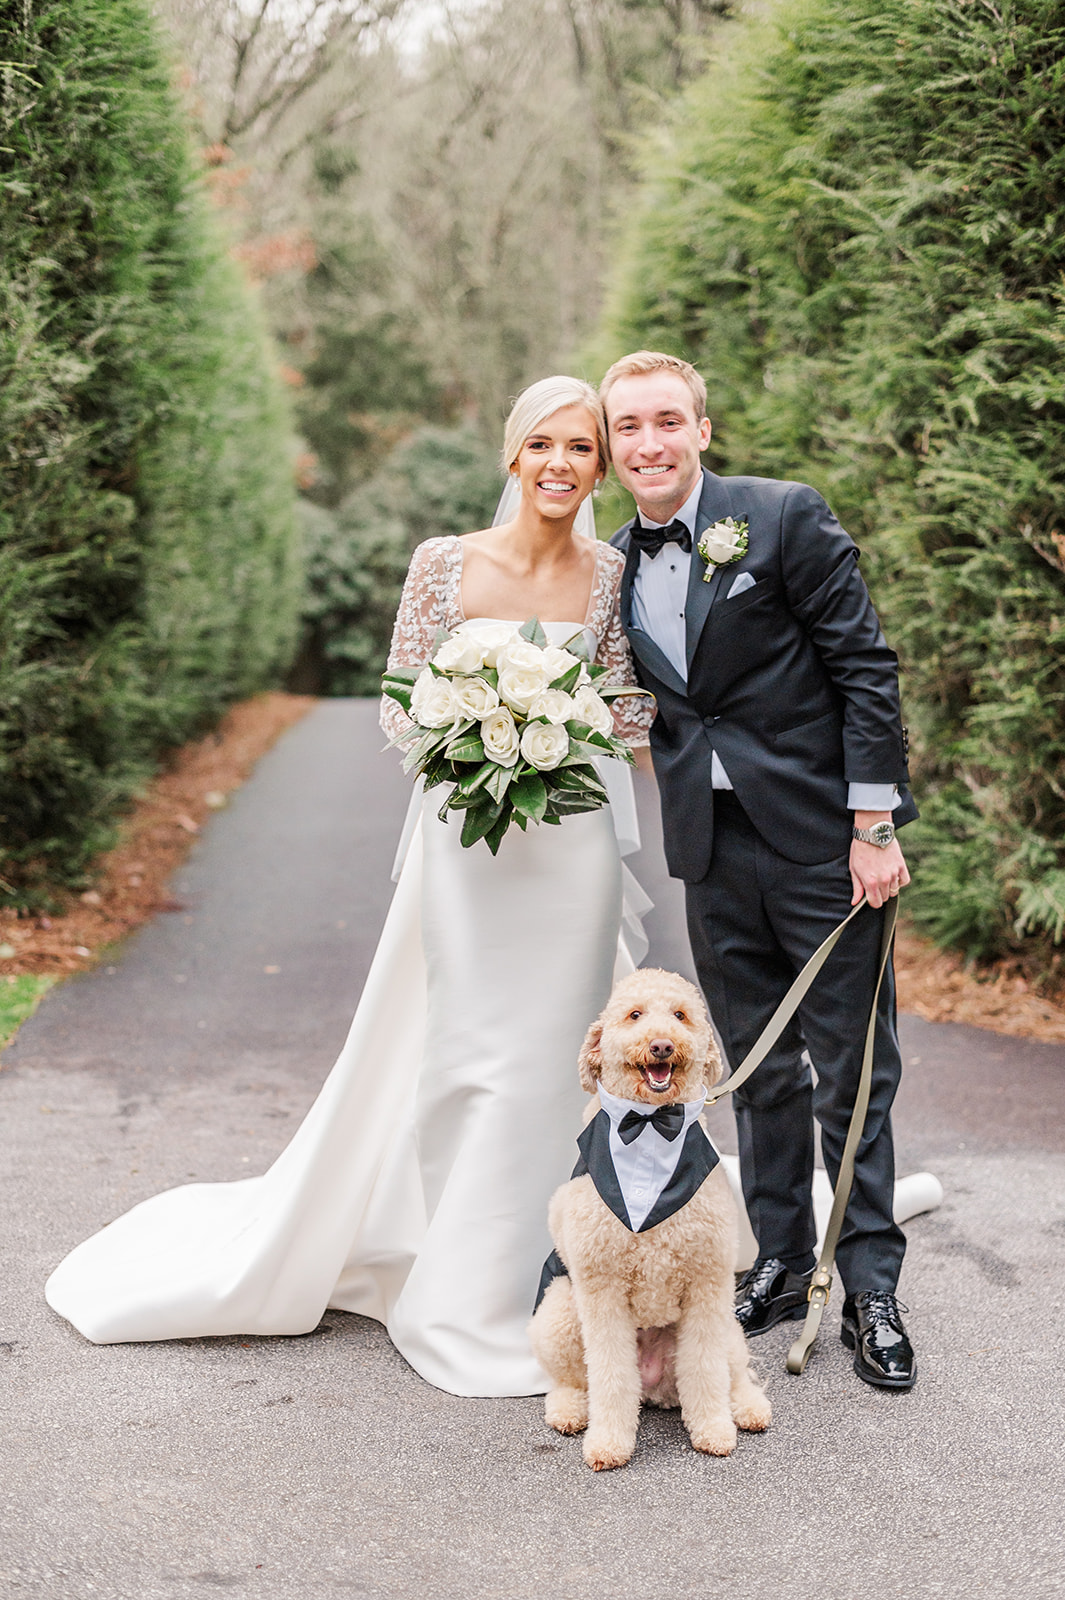 Adorable puppy ring bearer